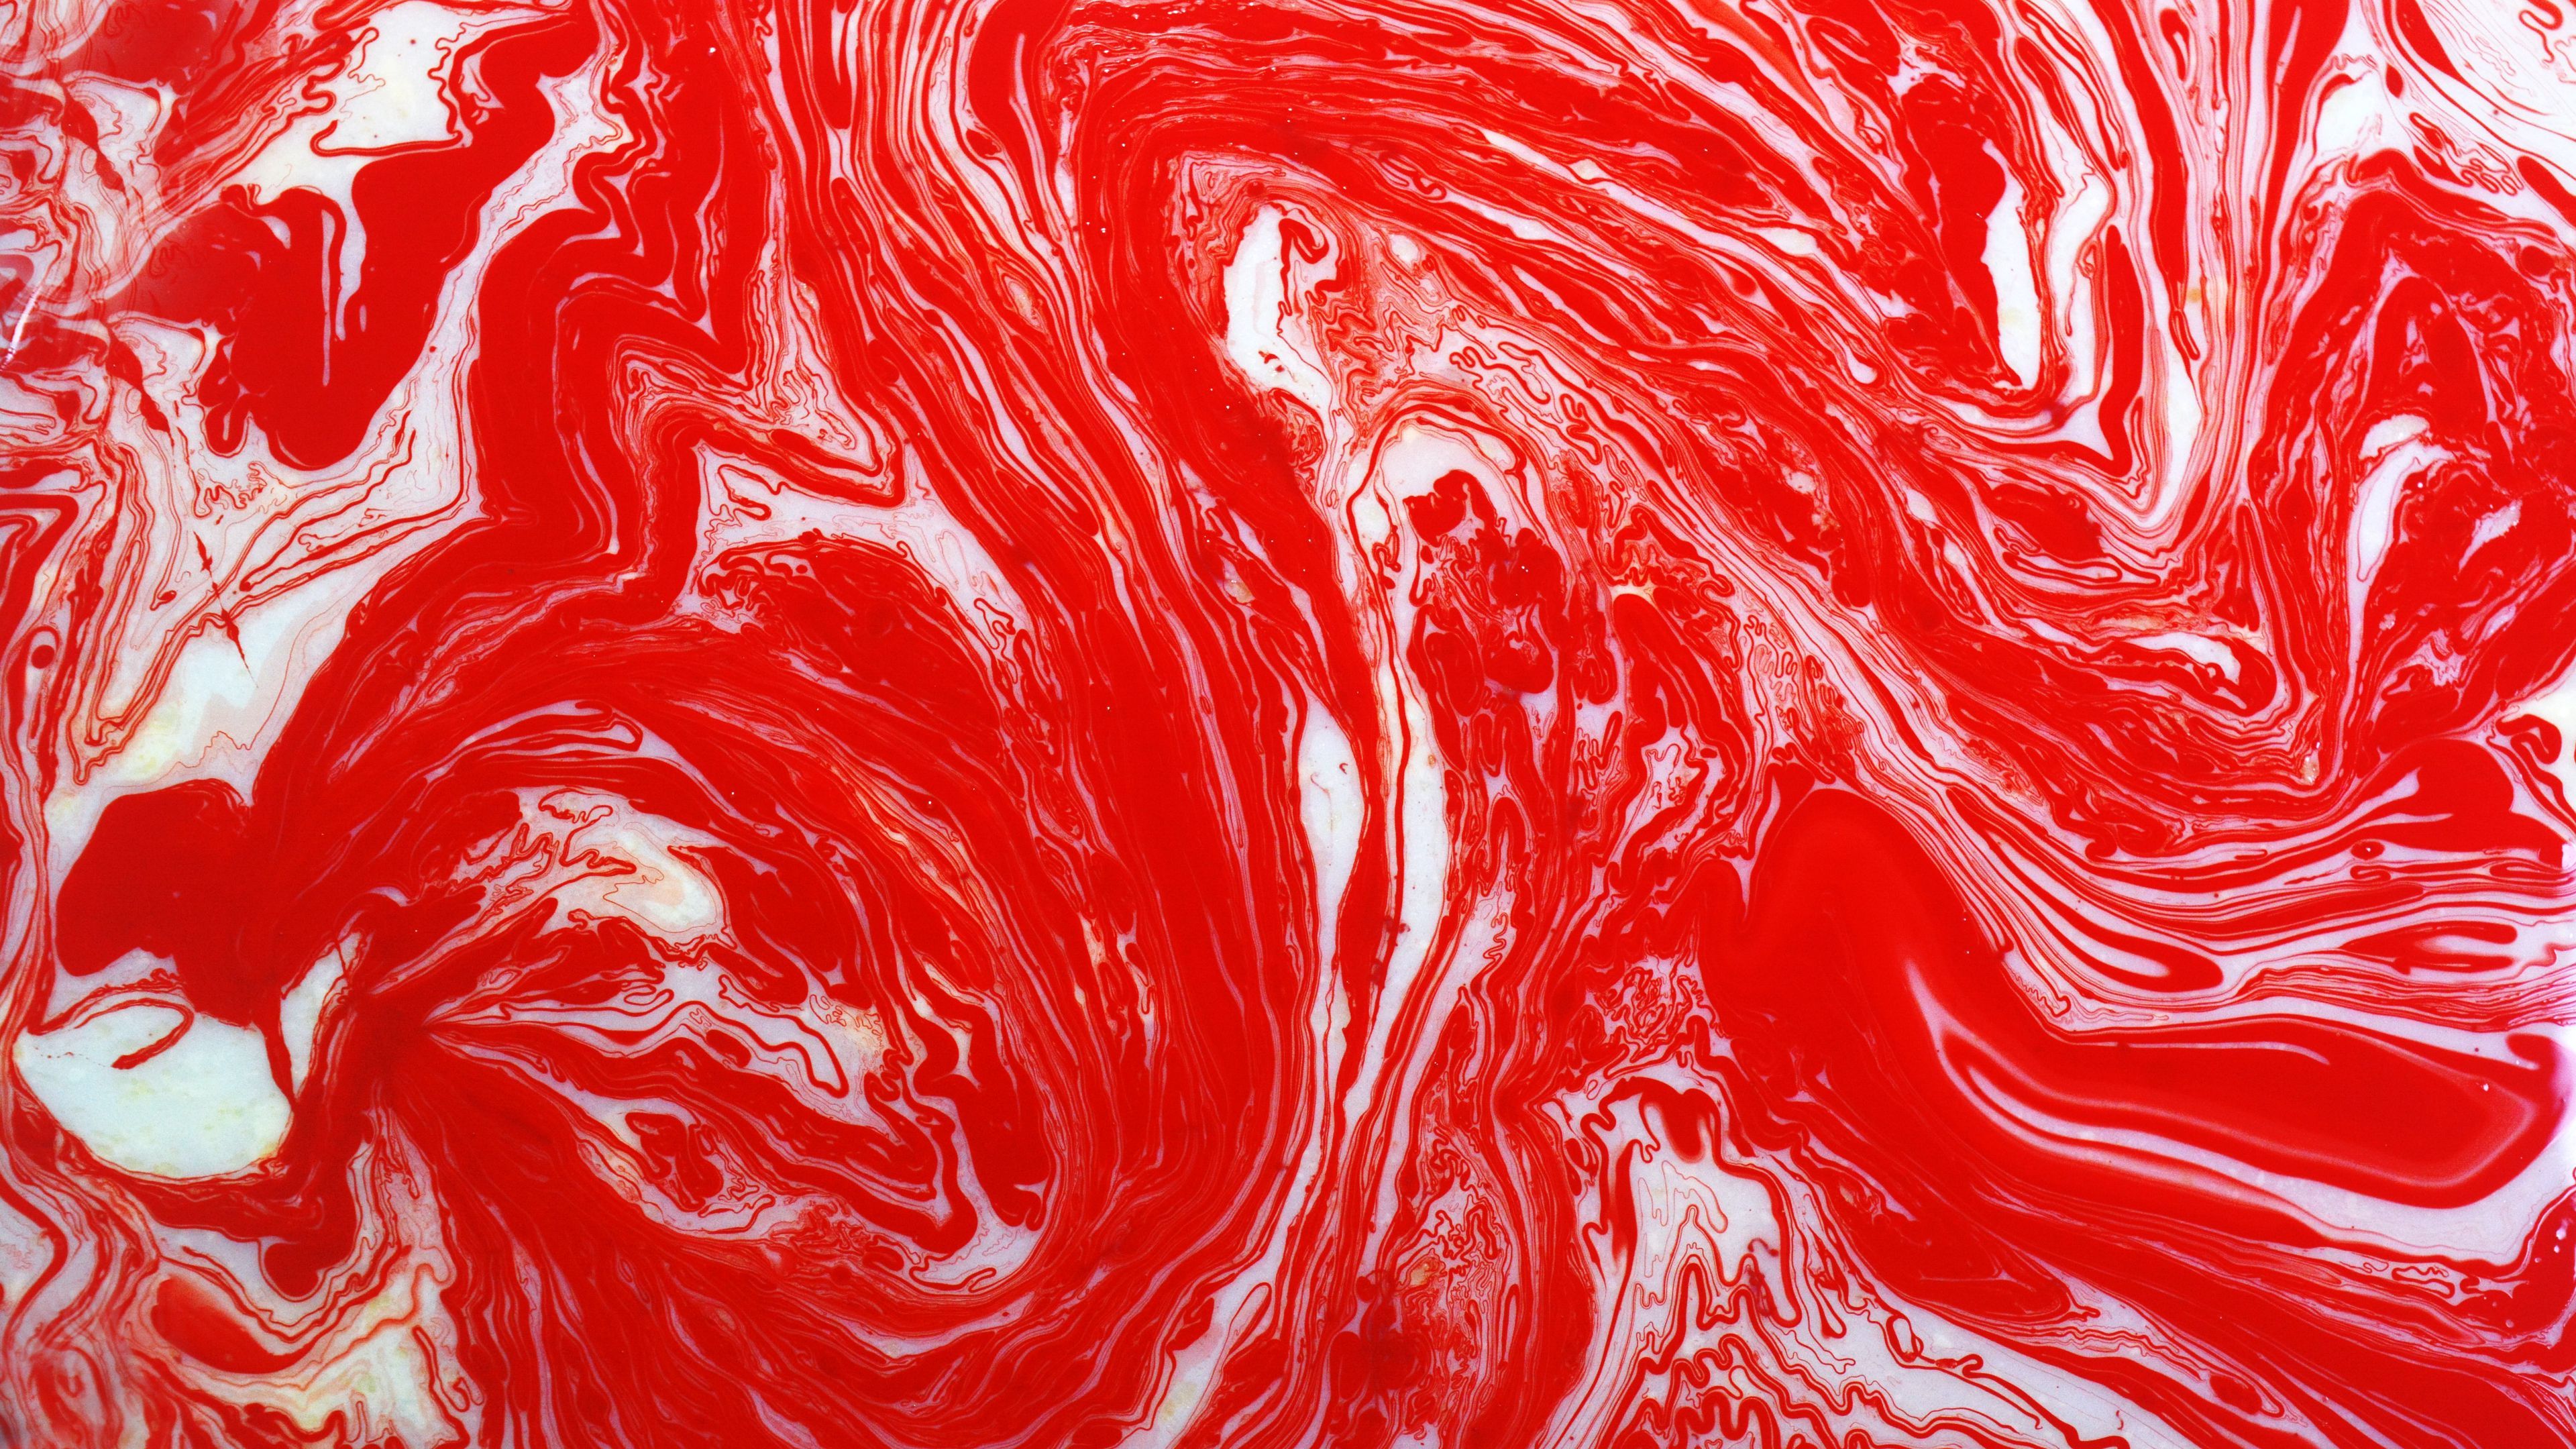 Download wallpaper 3840x2160 paint, stains, red, liquid 4k uhd 16:9 HD background